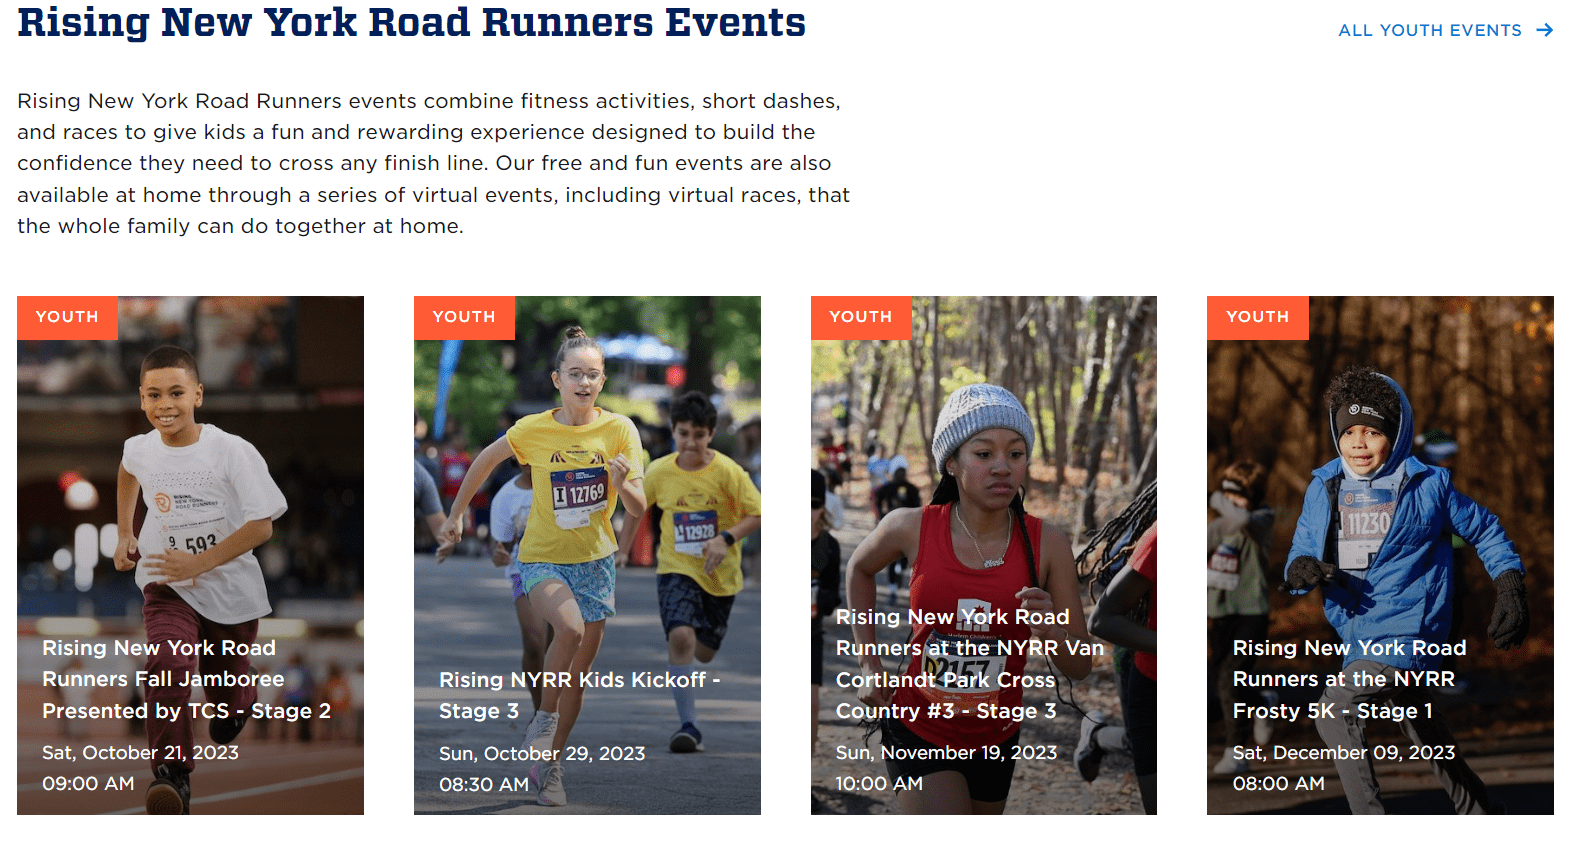 Rising NYRR Youth Events